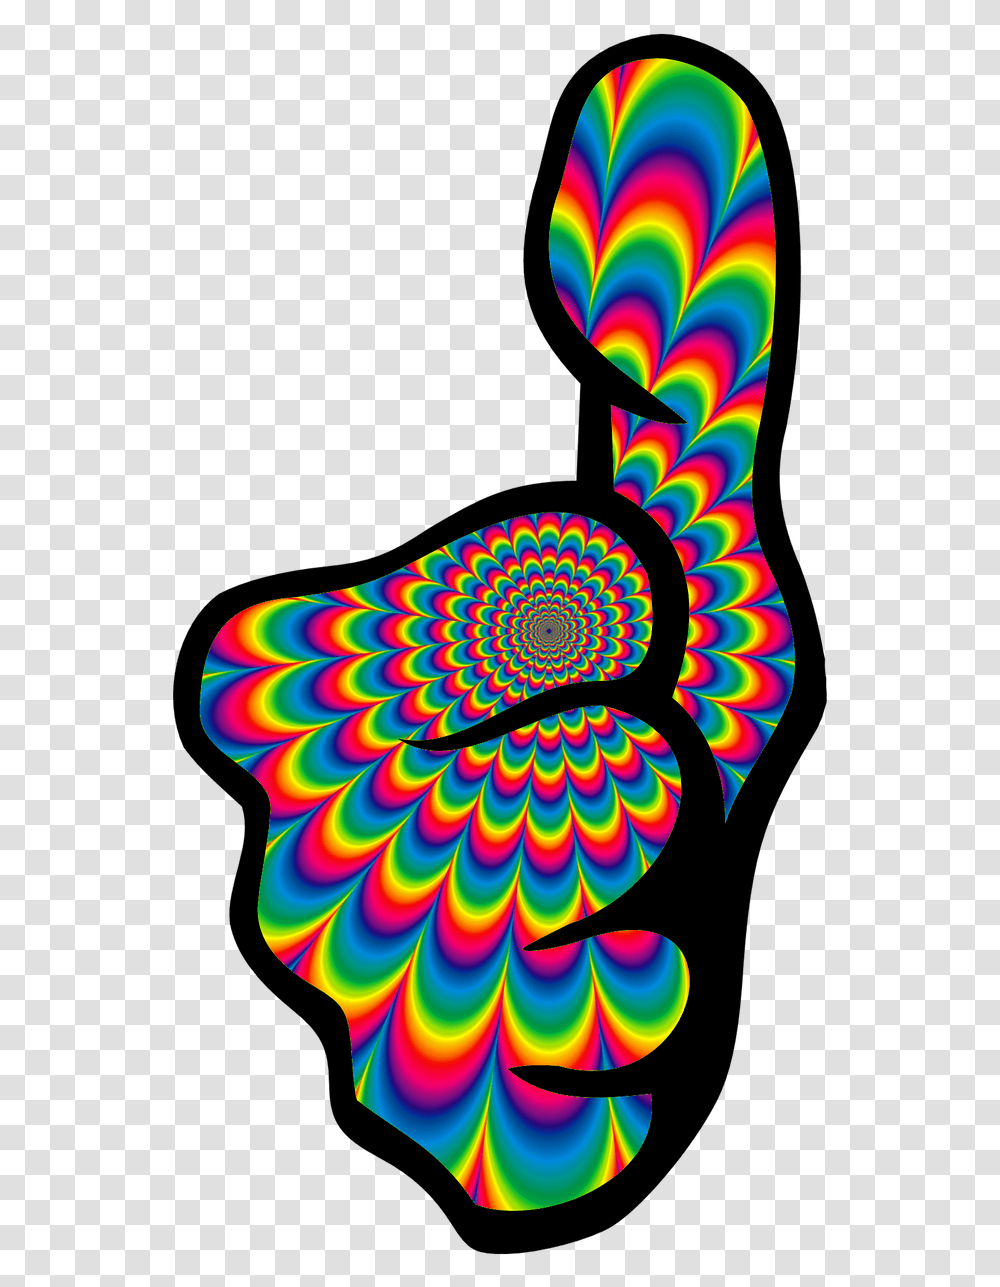 Thumbs Up Like 60s Image Psychedelic Thumbs Up, Pattern, Ornament, Fractal, Graphics Transparent Png